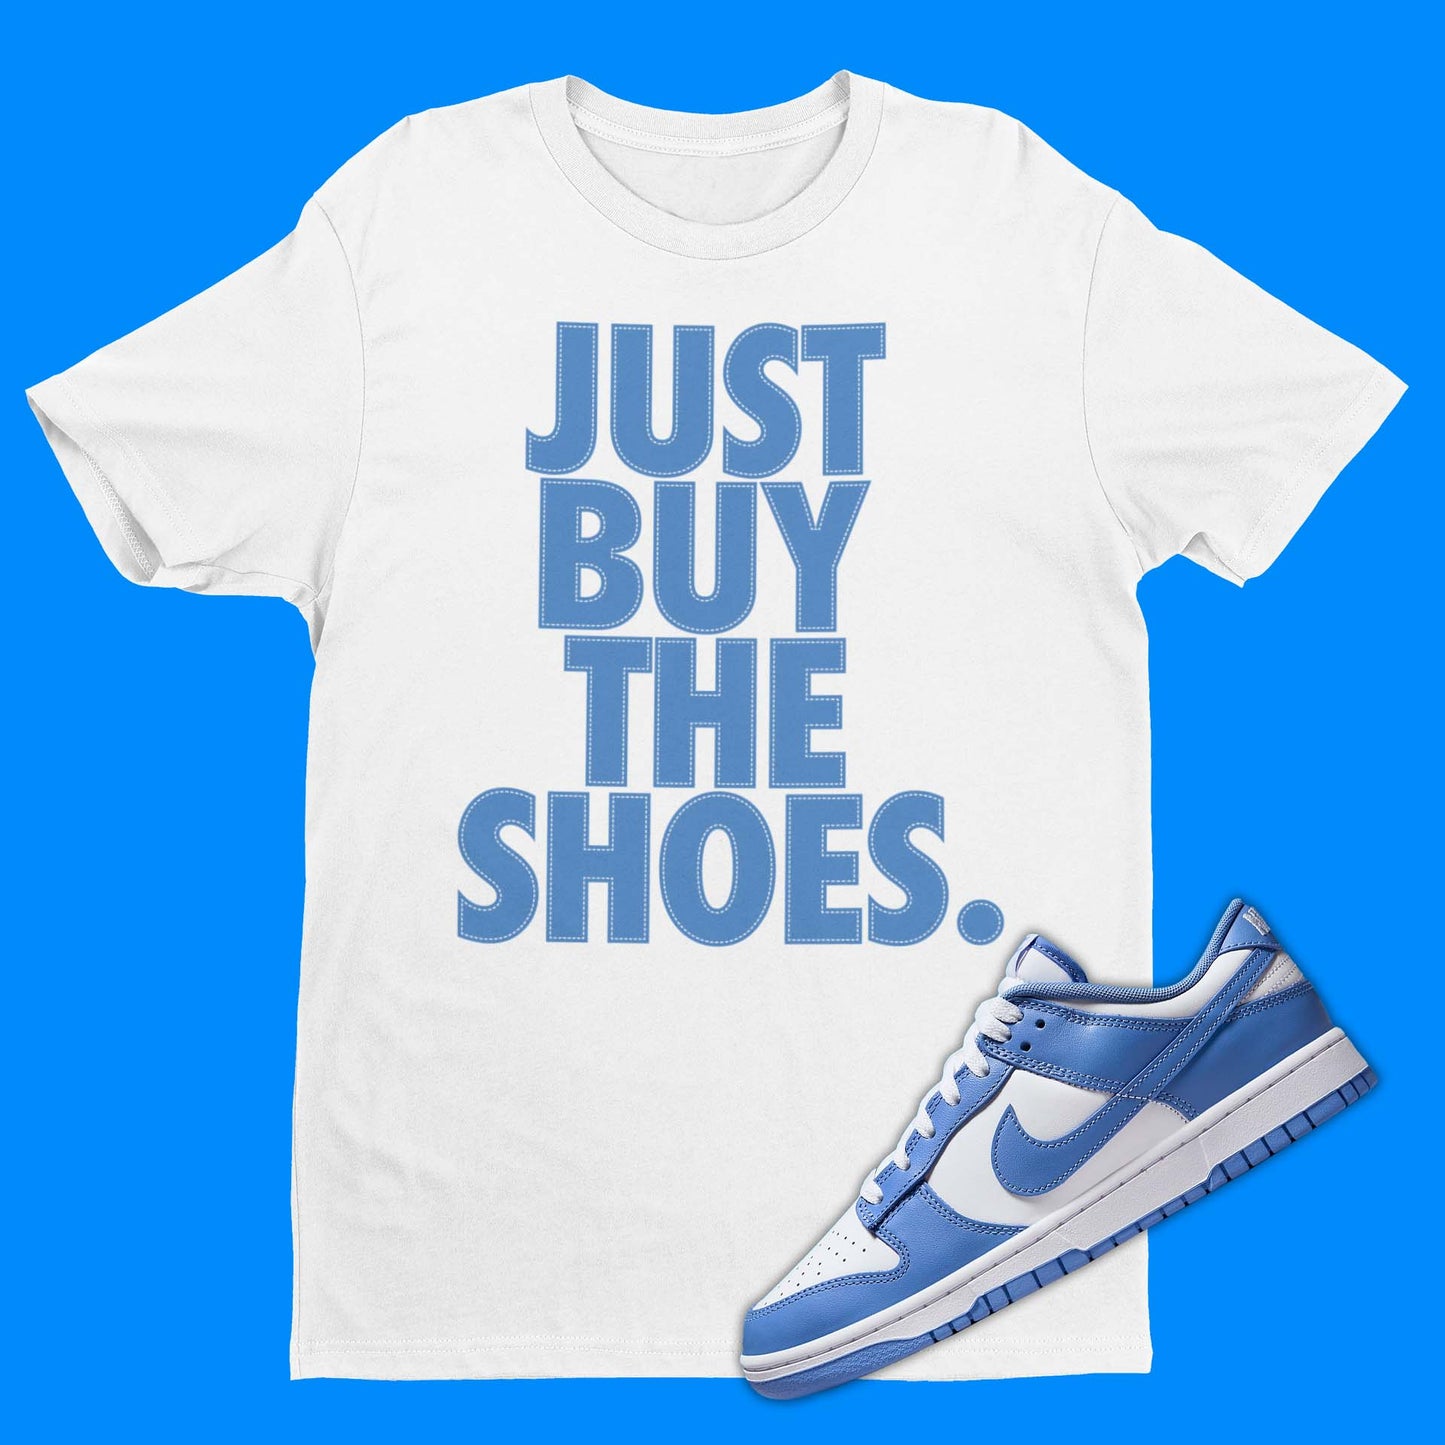 Just Buy The Shoes Nike Dunk Polar Blue Matching T-Shirt from SNKADX